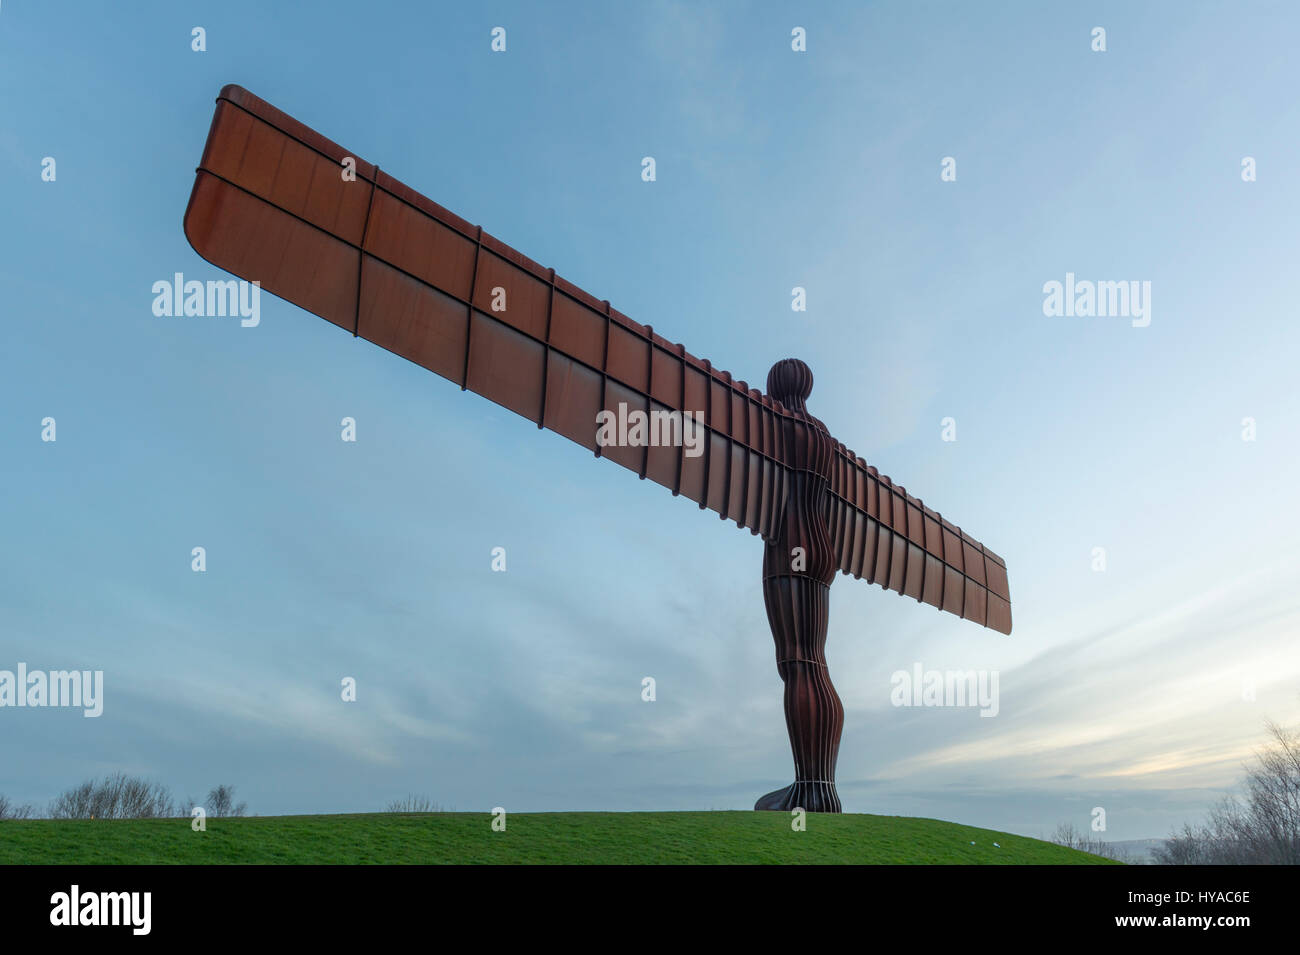 Angel of the North sculpture at dusk, Gateshead,Tyne and Wear,England Stock Photo